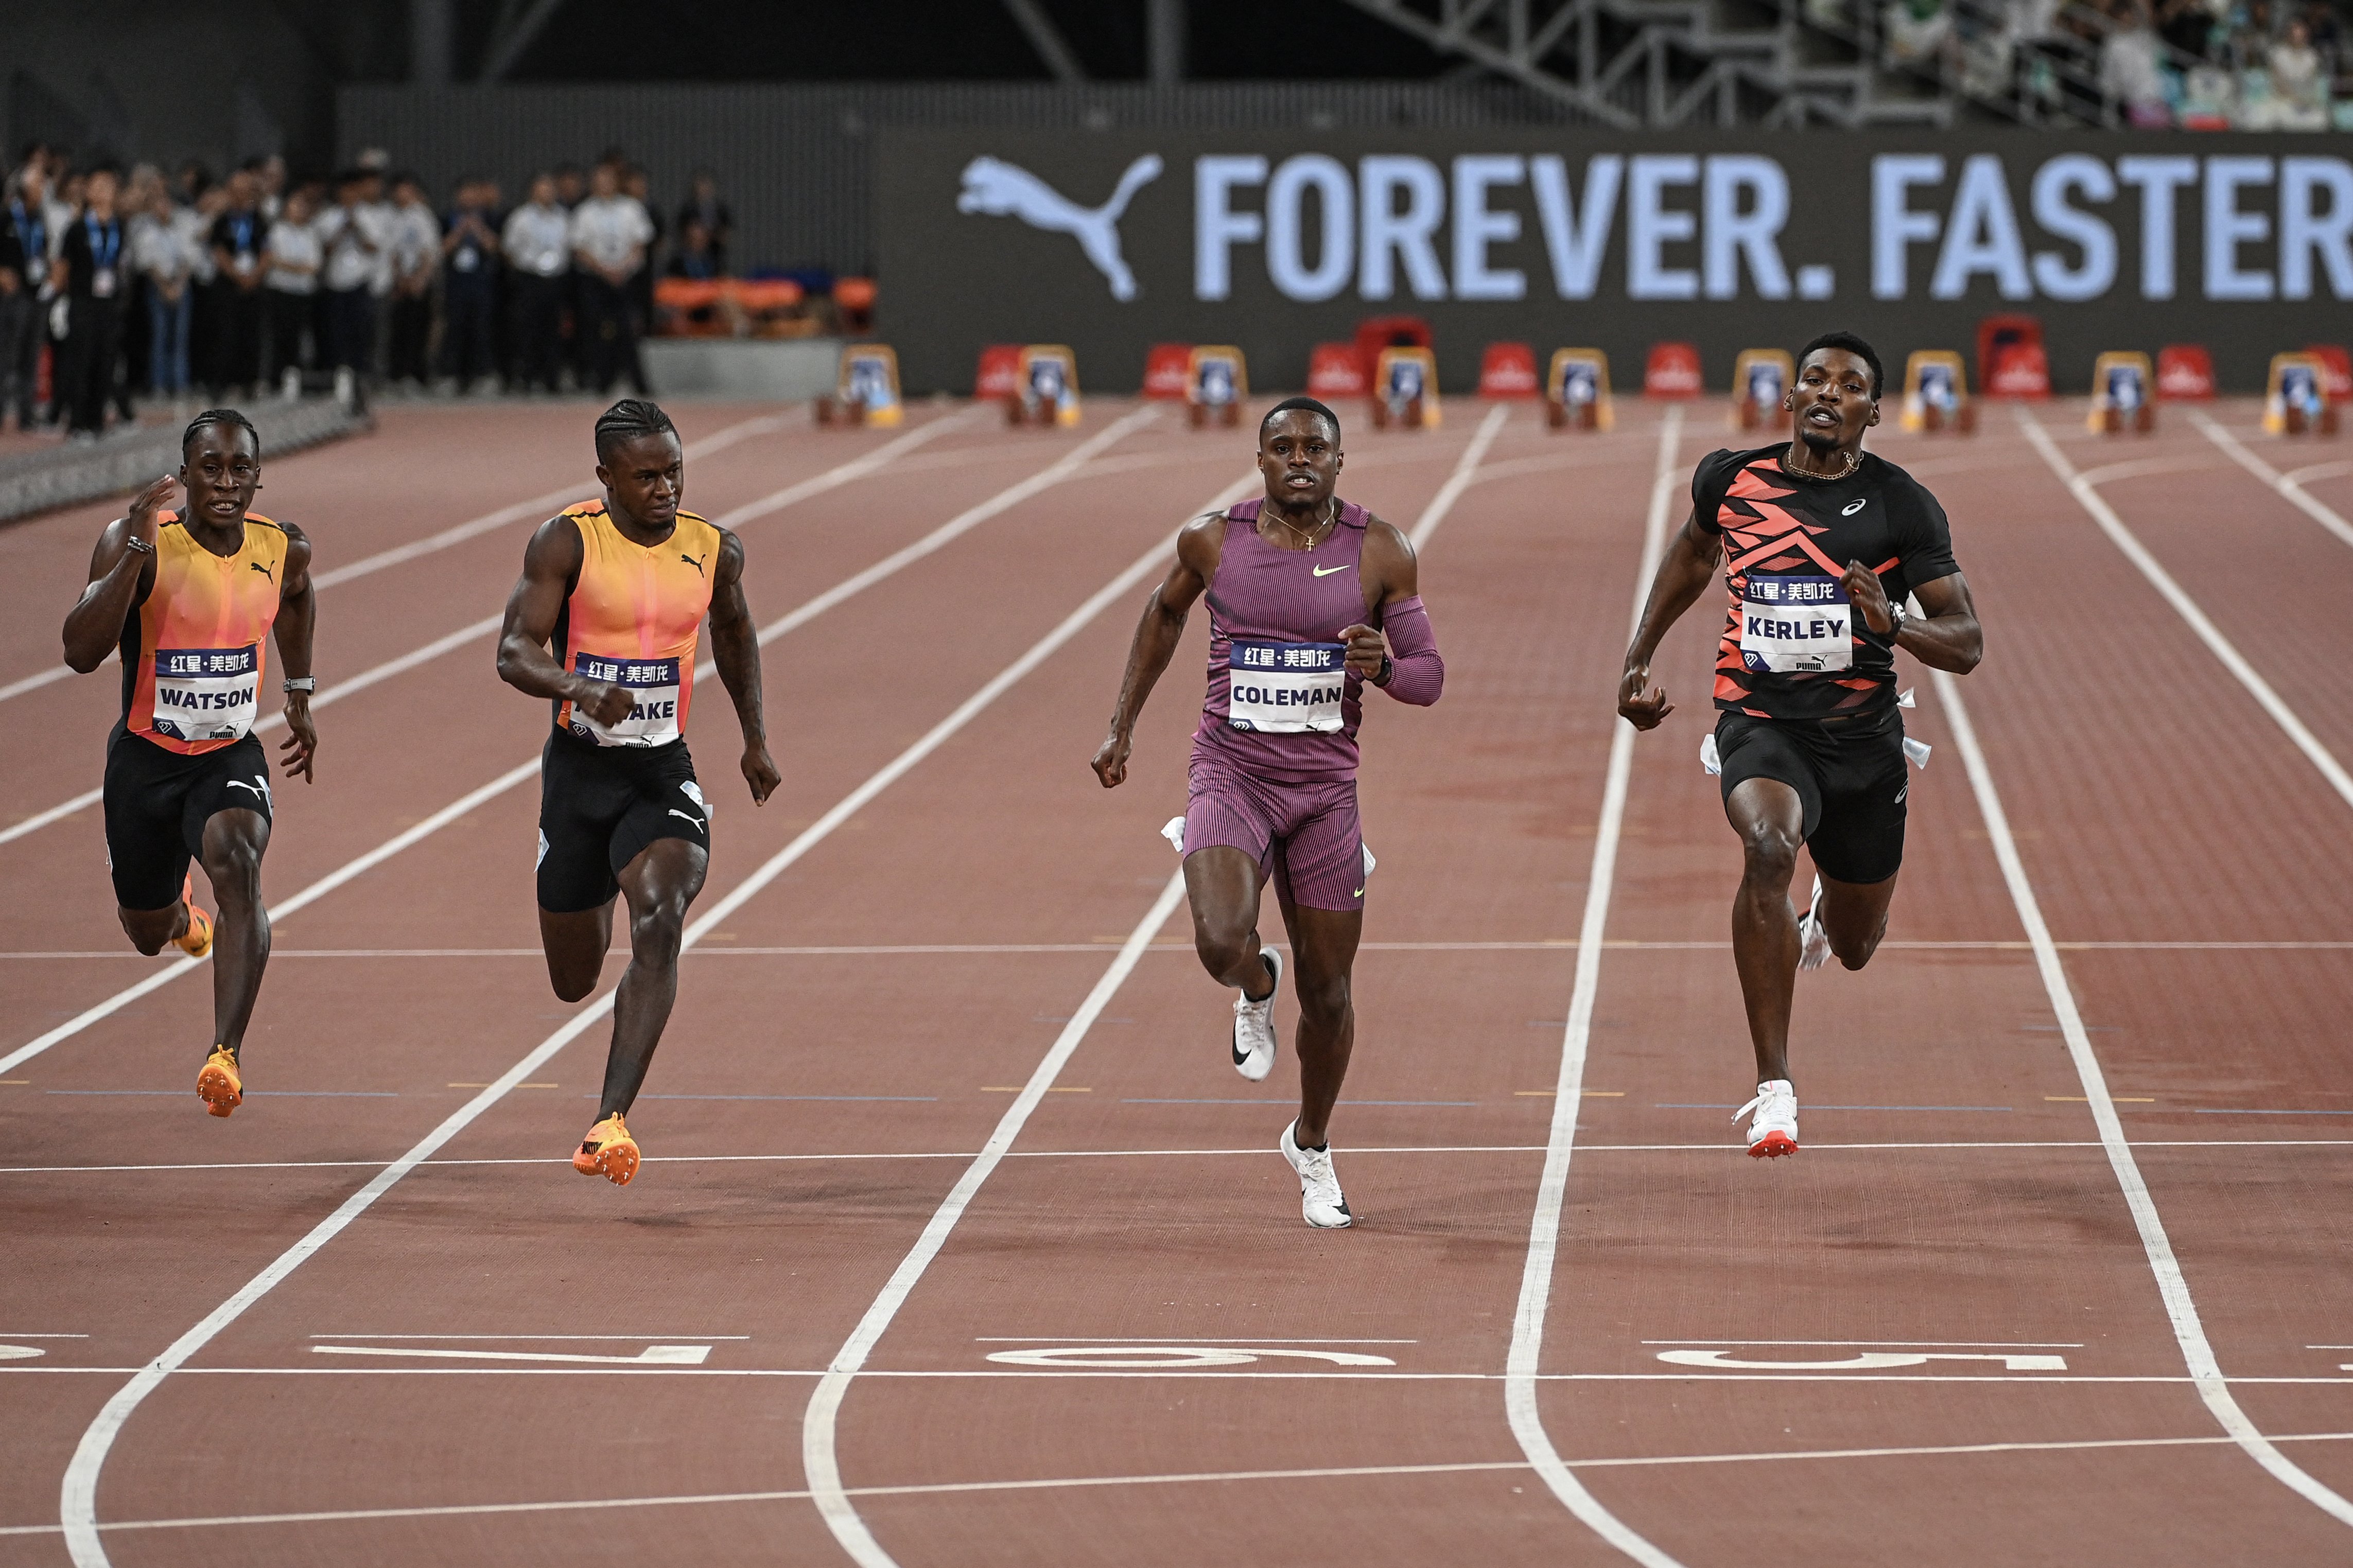 Jamaica's Rohan Watson, Jamaica's Ackeem Blake, US' Christian Coleman and US' Fred Kerley compete in the 100m